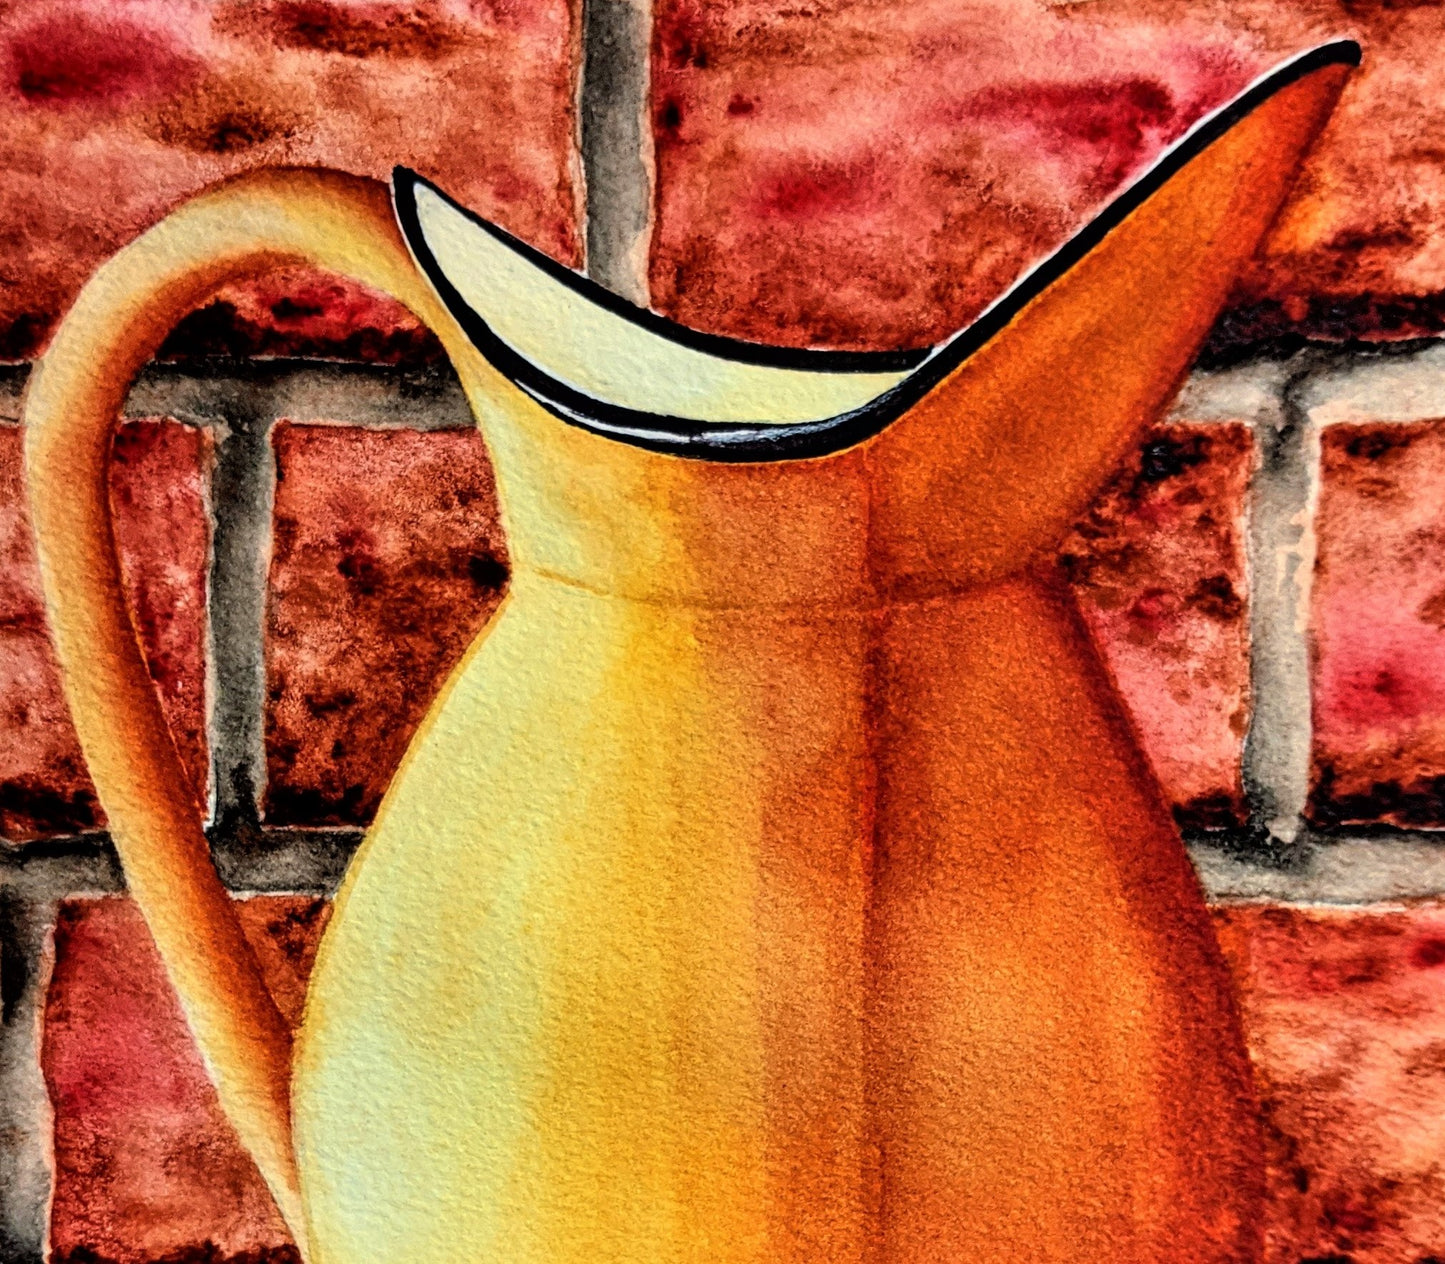 Harvest Pitcher watercolor on paper painting detail